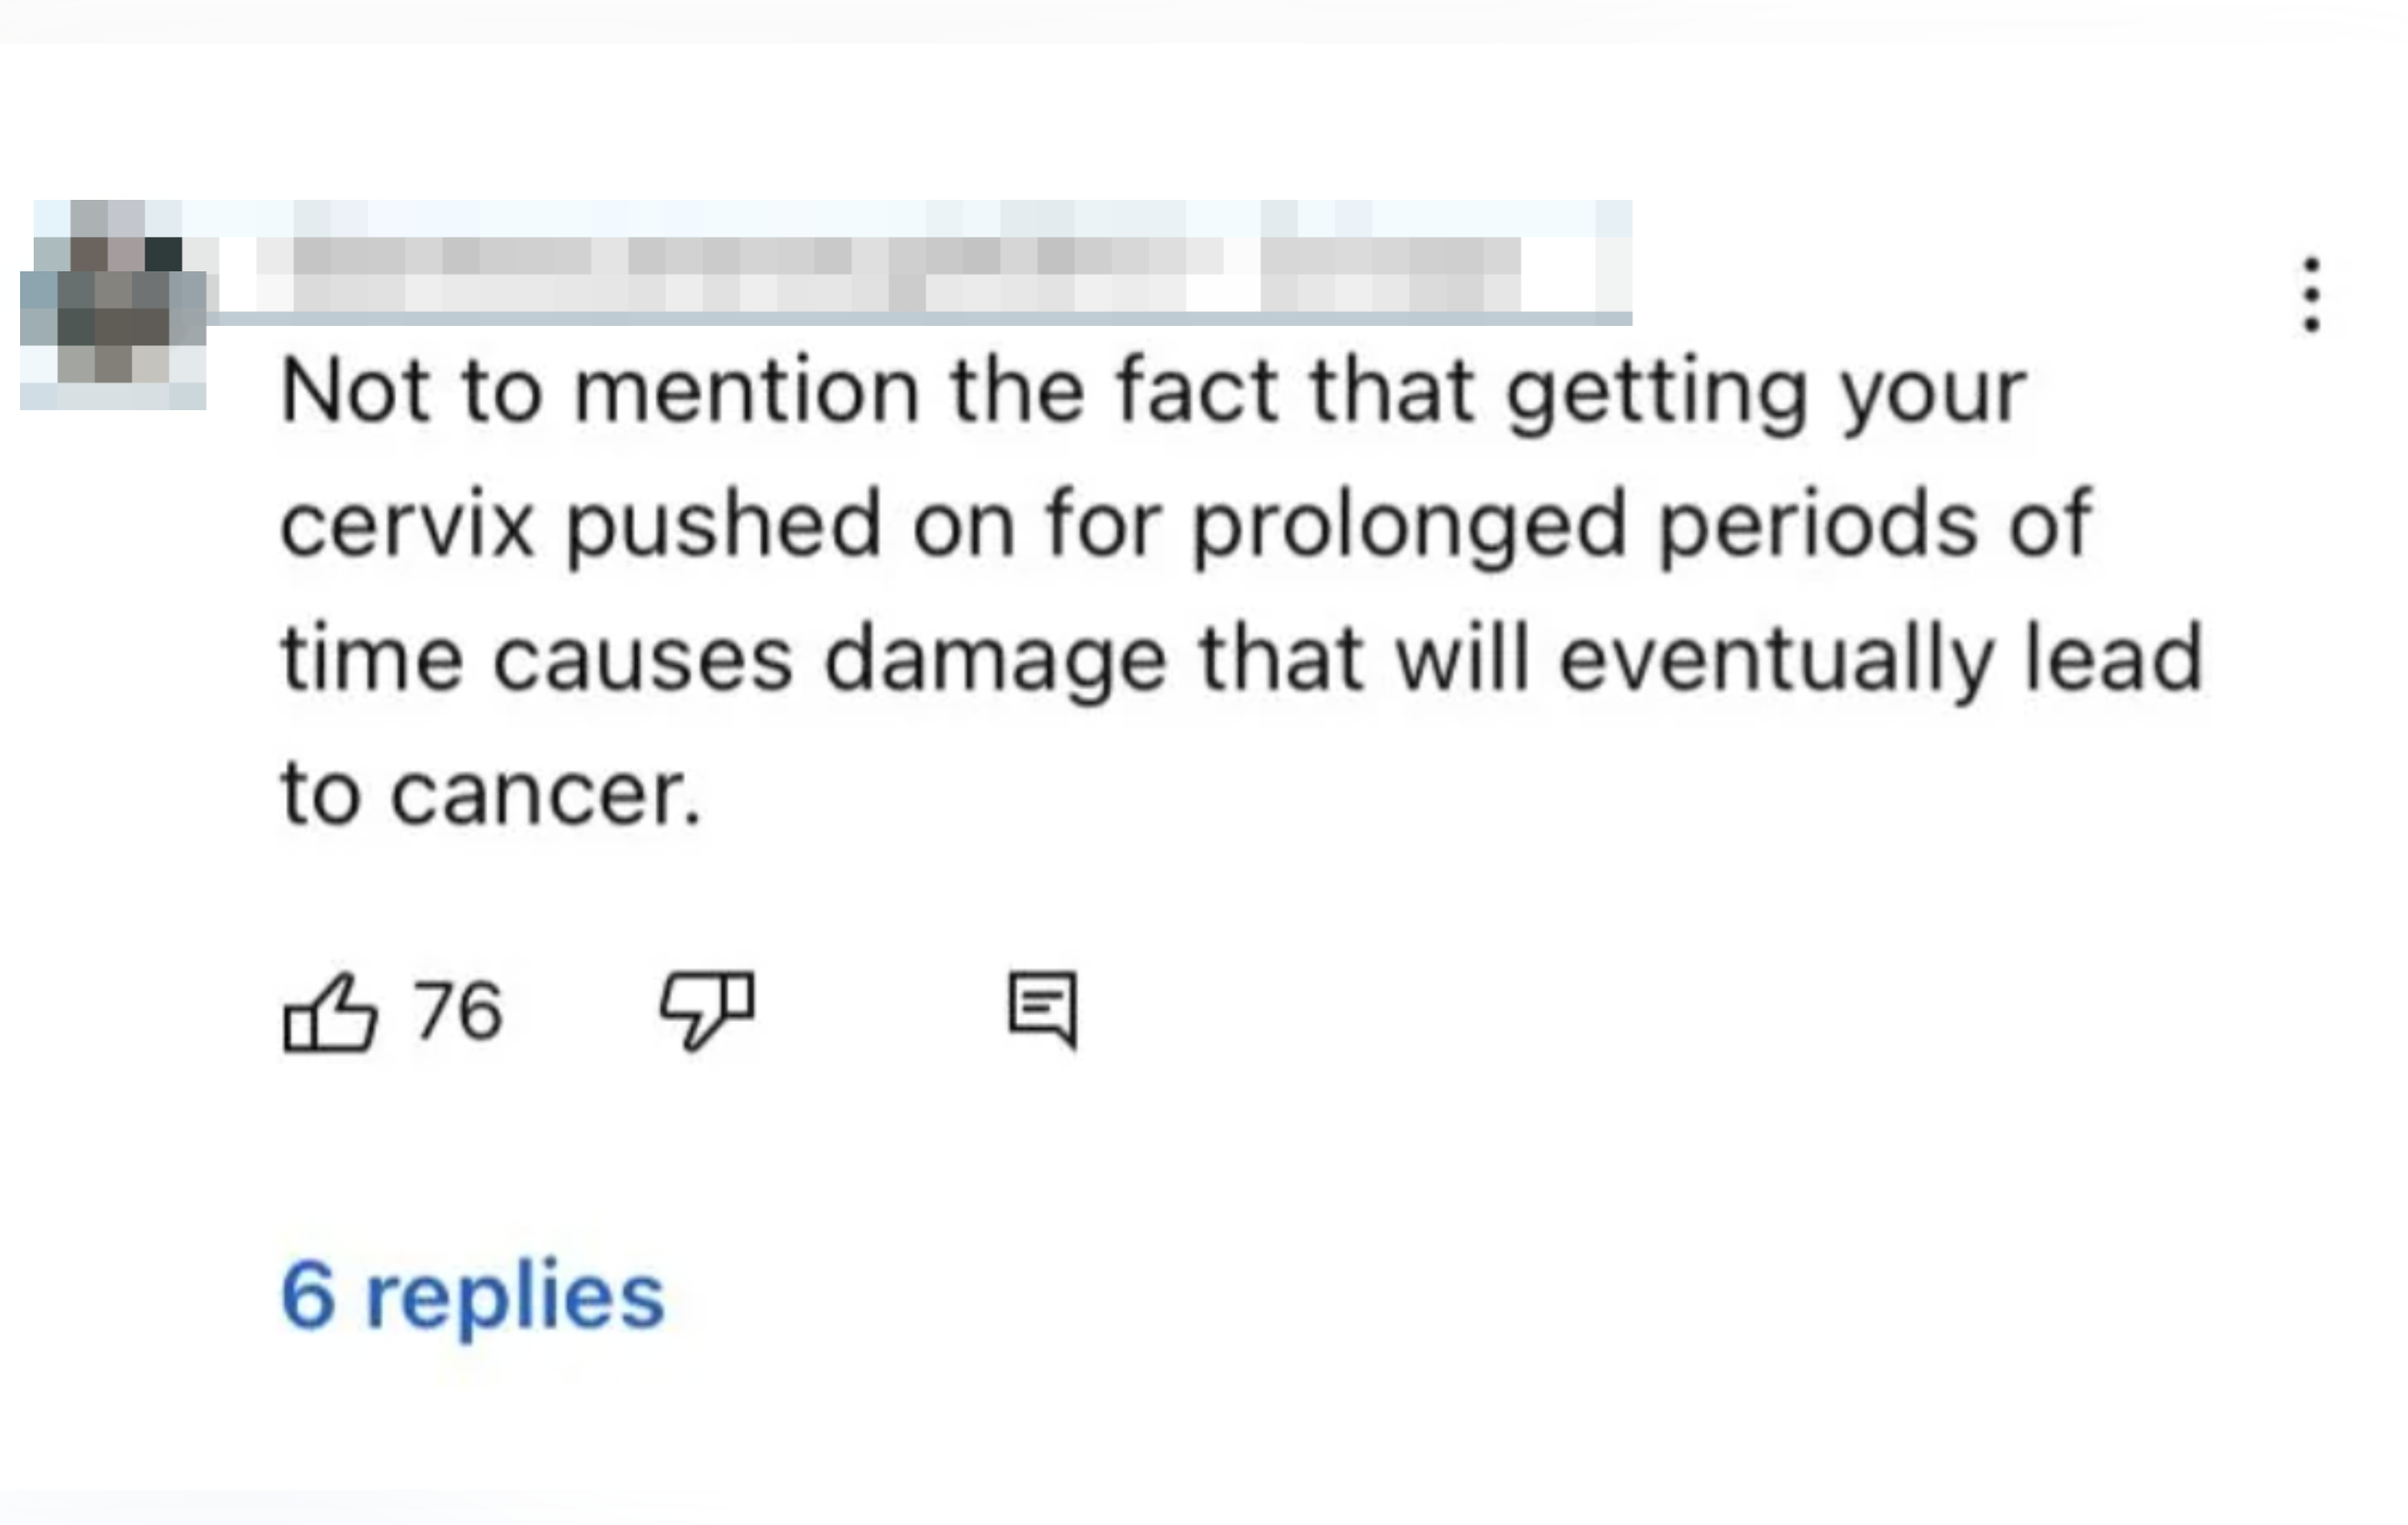 A screenshot of a social media comment discussing potential damage from prolonged cervical pressure